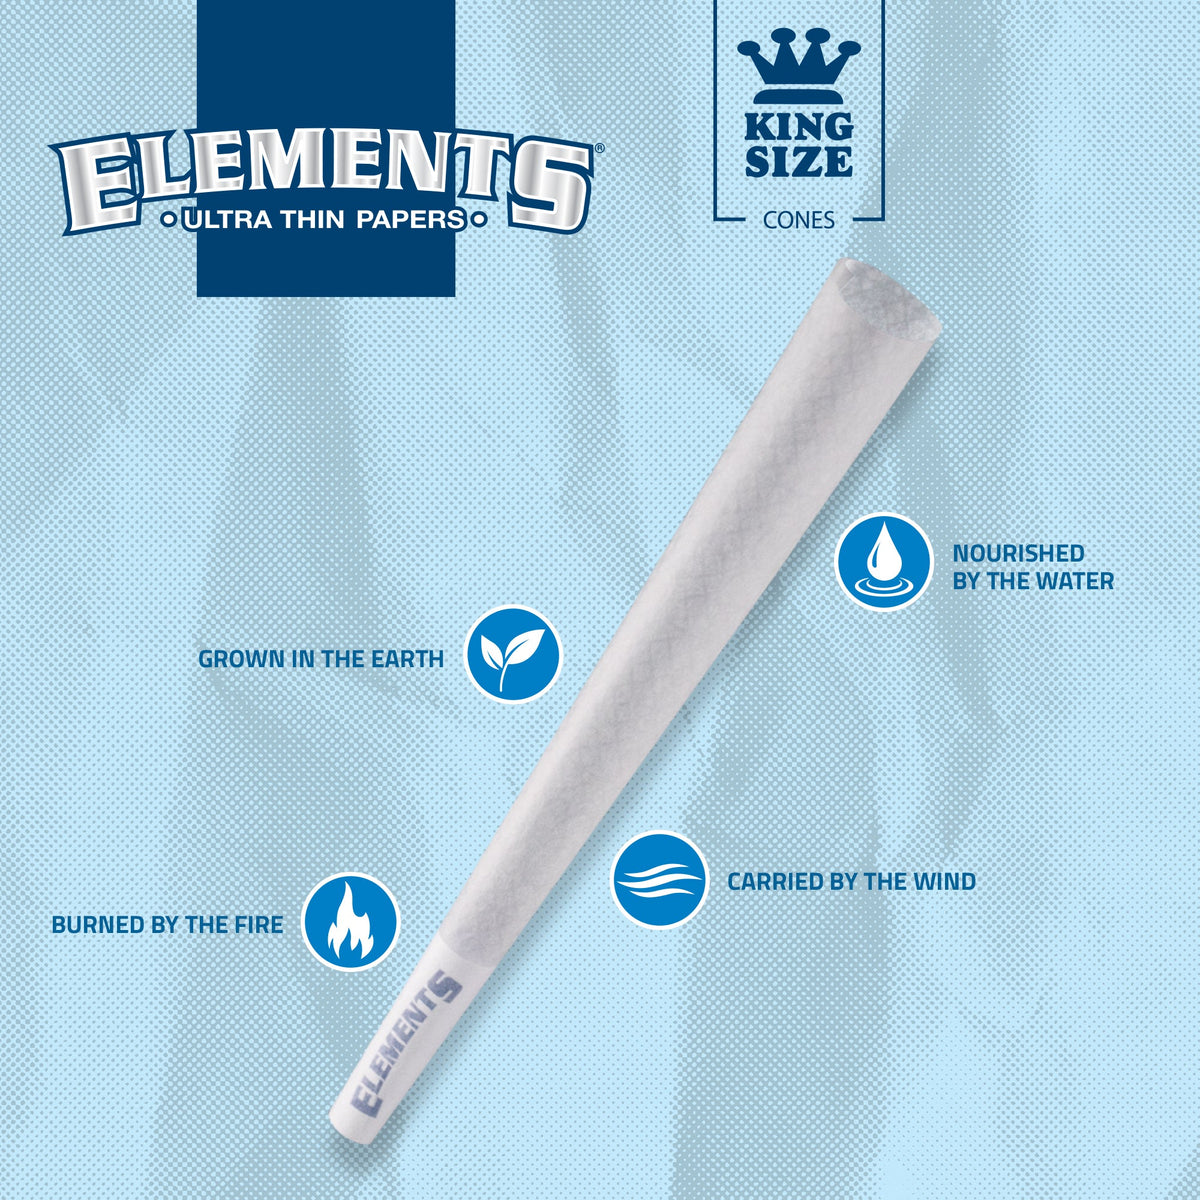 Elements King Size Cones RAW Cones esd-official